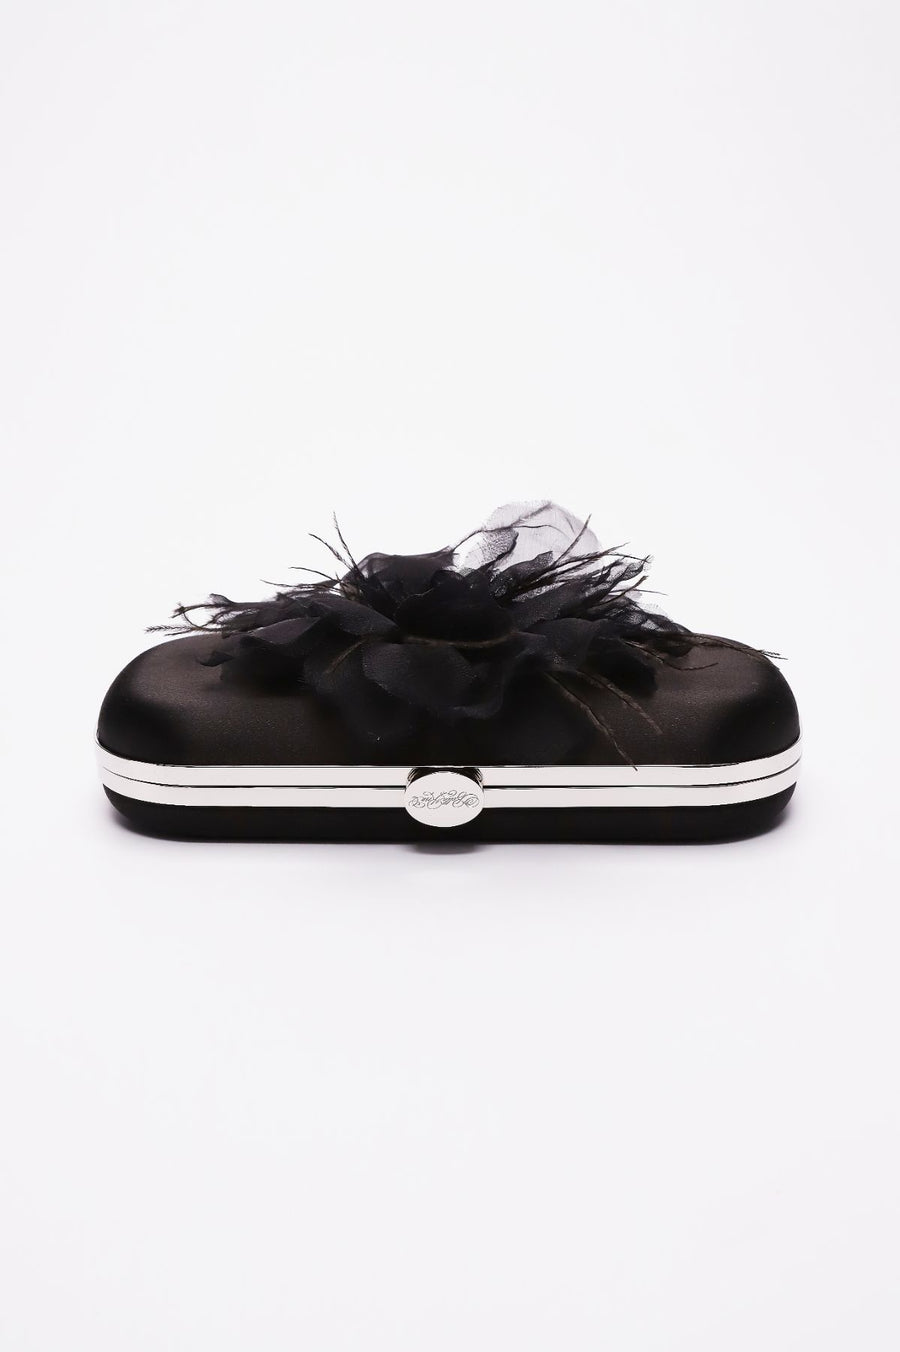 Side closed view of Bella Fiori Clutch in black satin with black flower adored on front side.